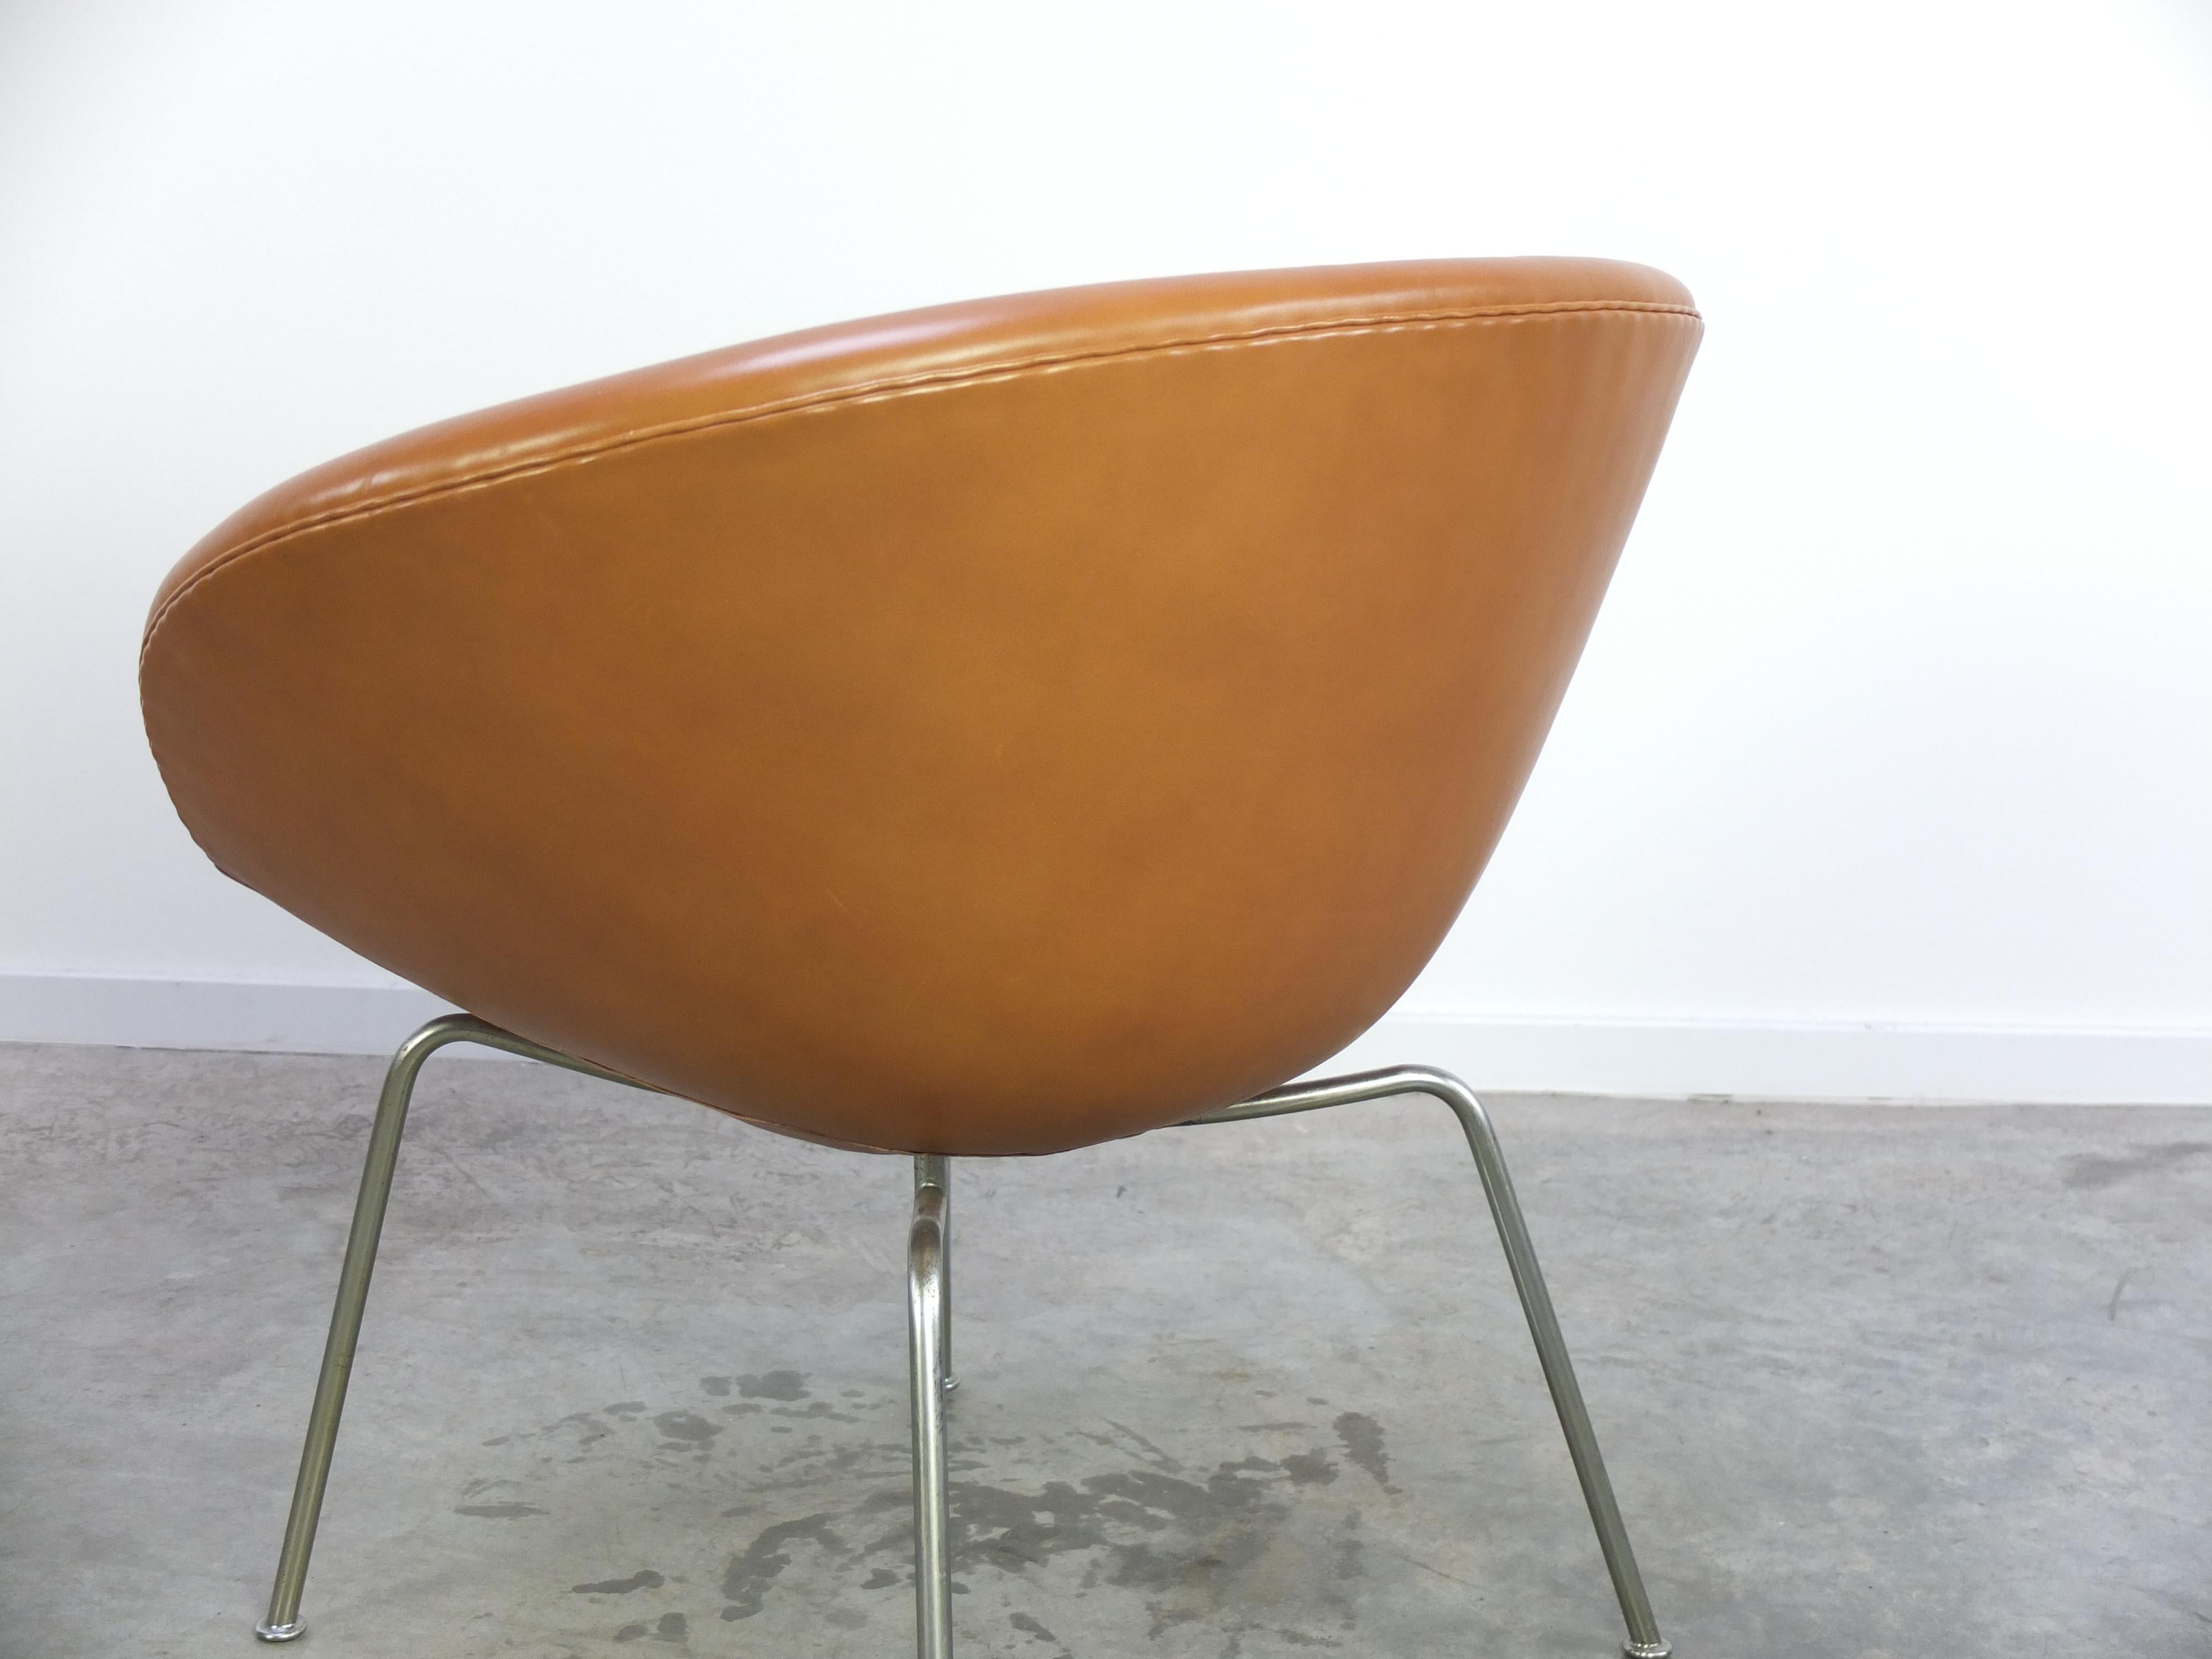 Early Pair of 'Pot' Lounge Chairs by Arne Jacobsen for Fritz Hansen, 1950s For Sale 9